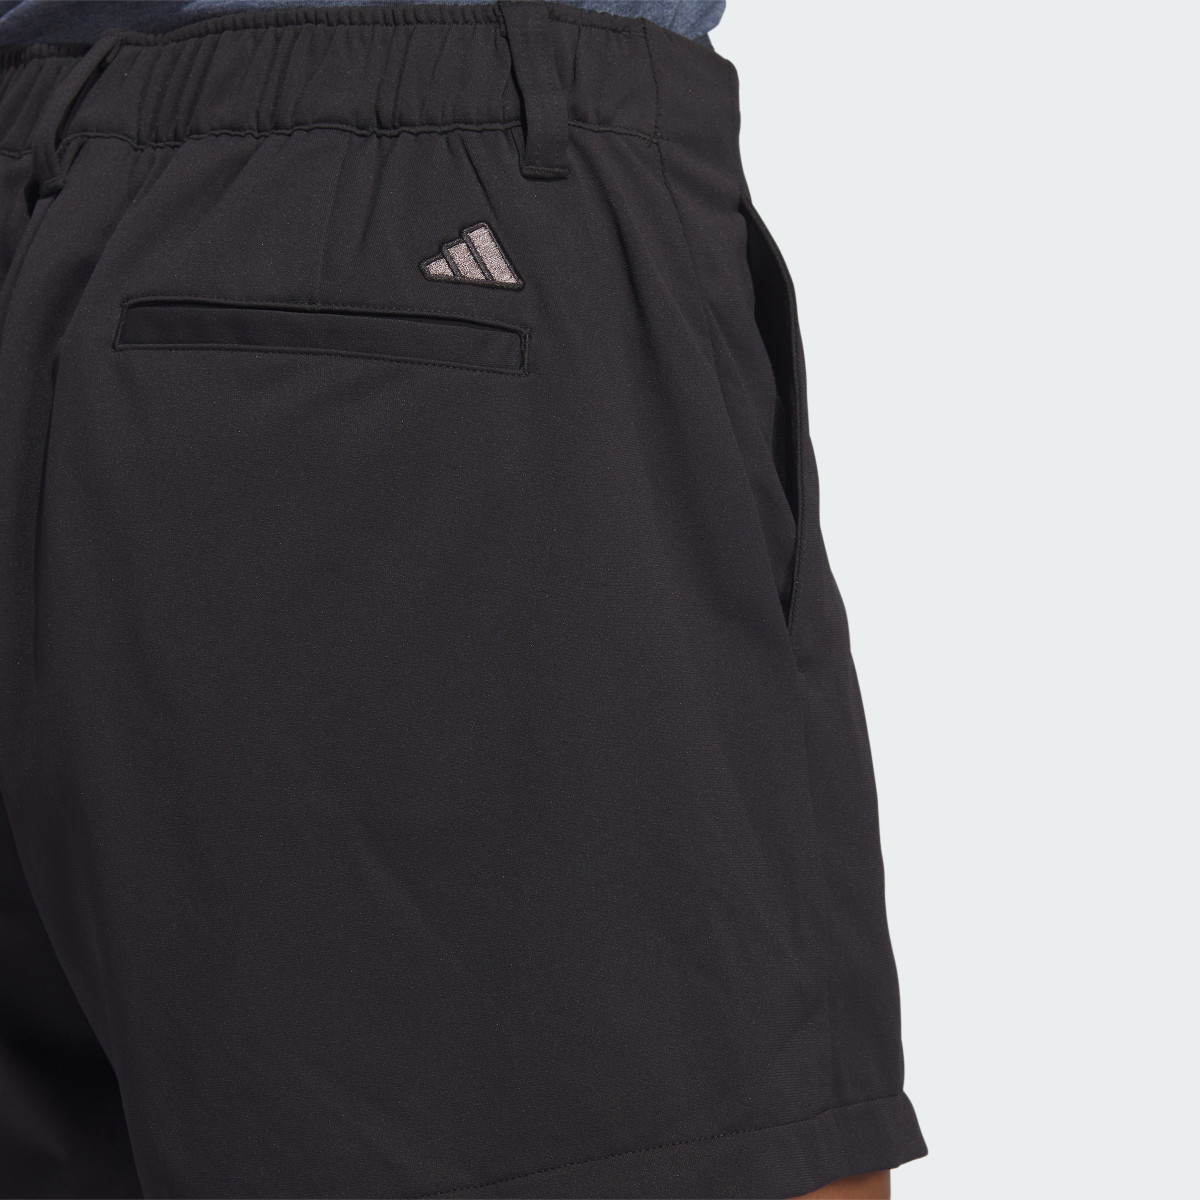 Adidas Short Go-To Pleated. 7